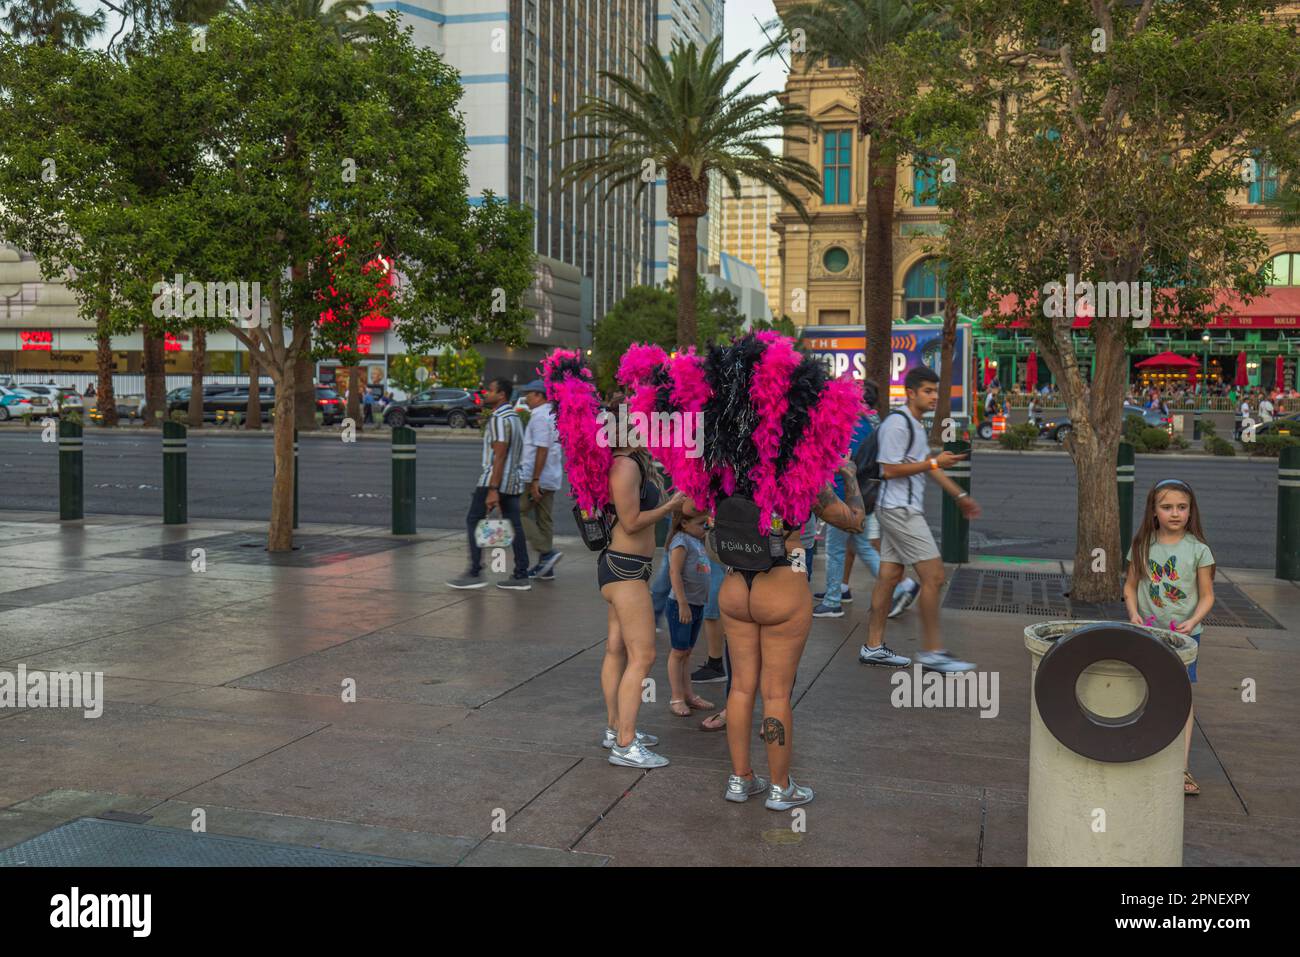 Entertainment girls in colorful costumes inviting tourists for evening performances. Las Vegas Strip, USA. Stock Photo